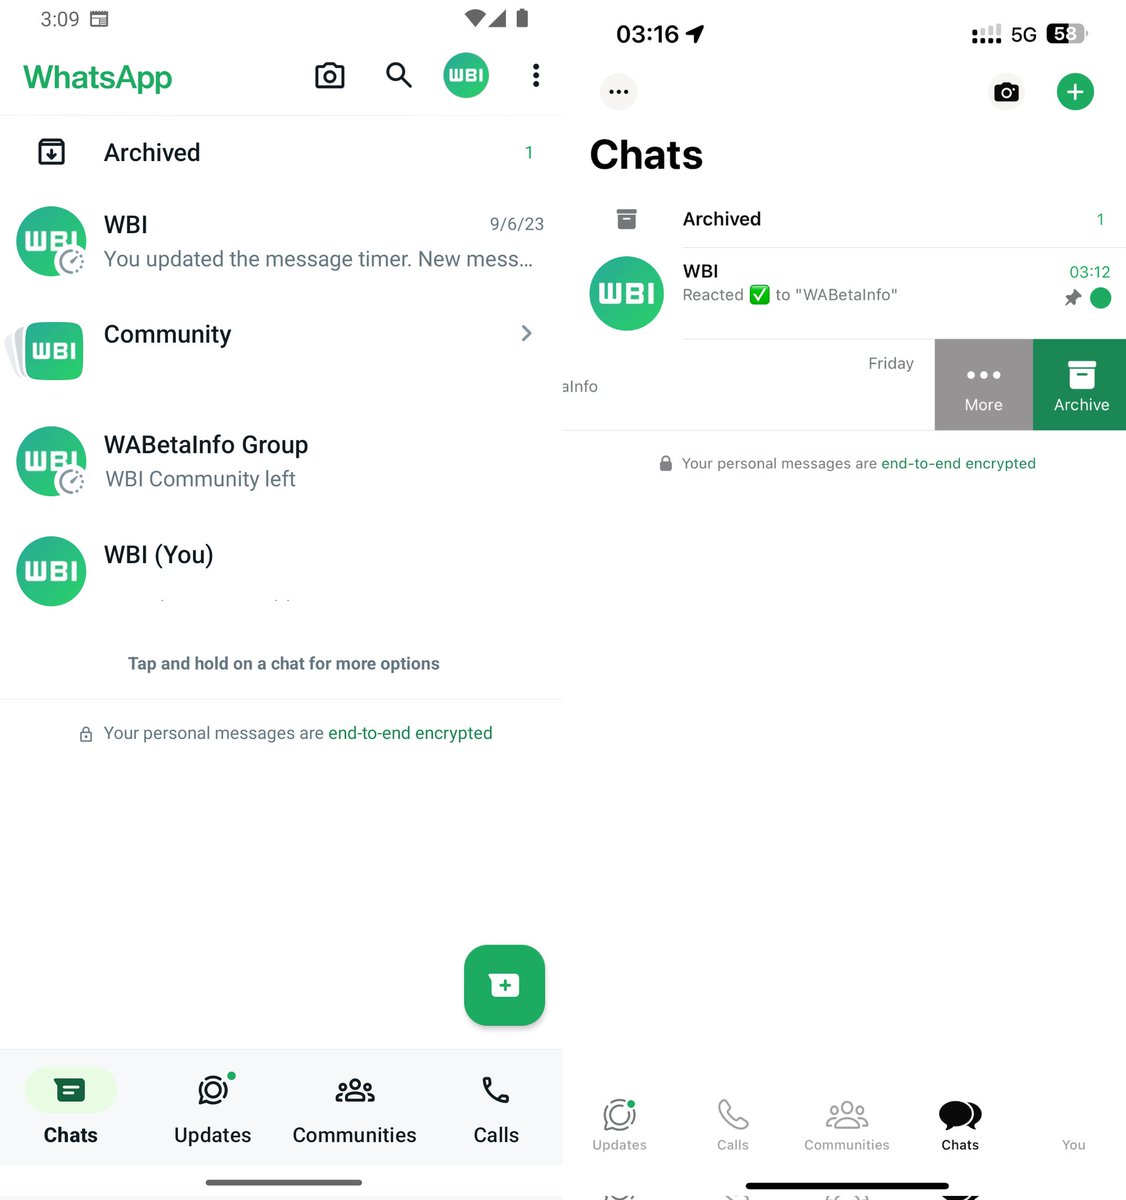 New interface for IOS is available.
#WhatsApp #whatsappdown